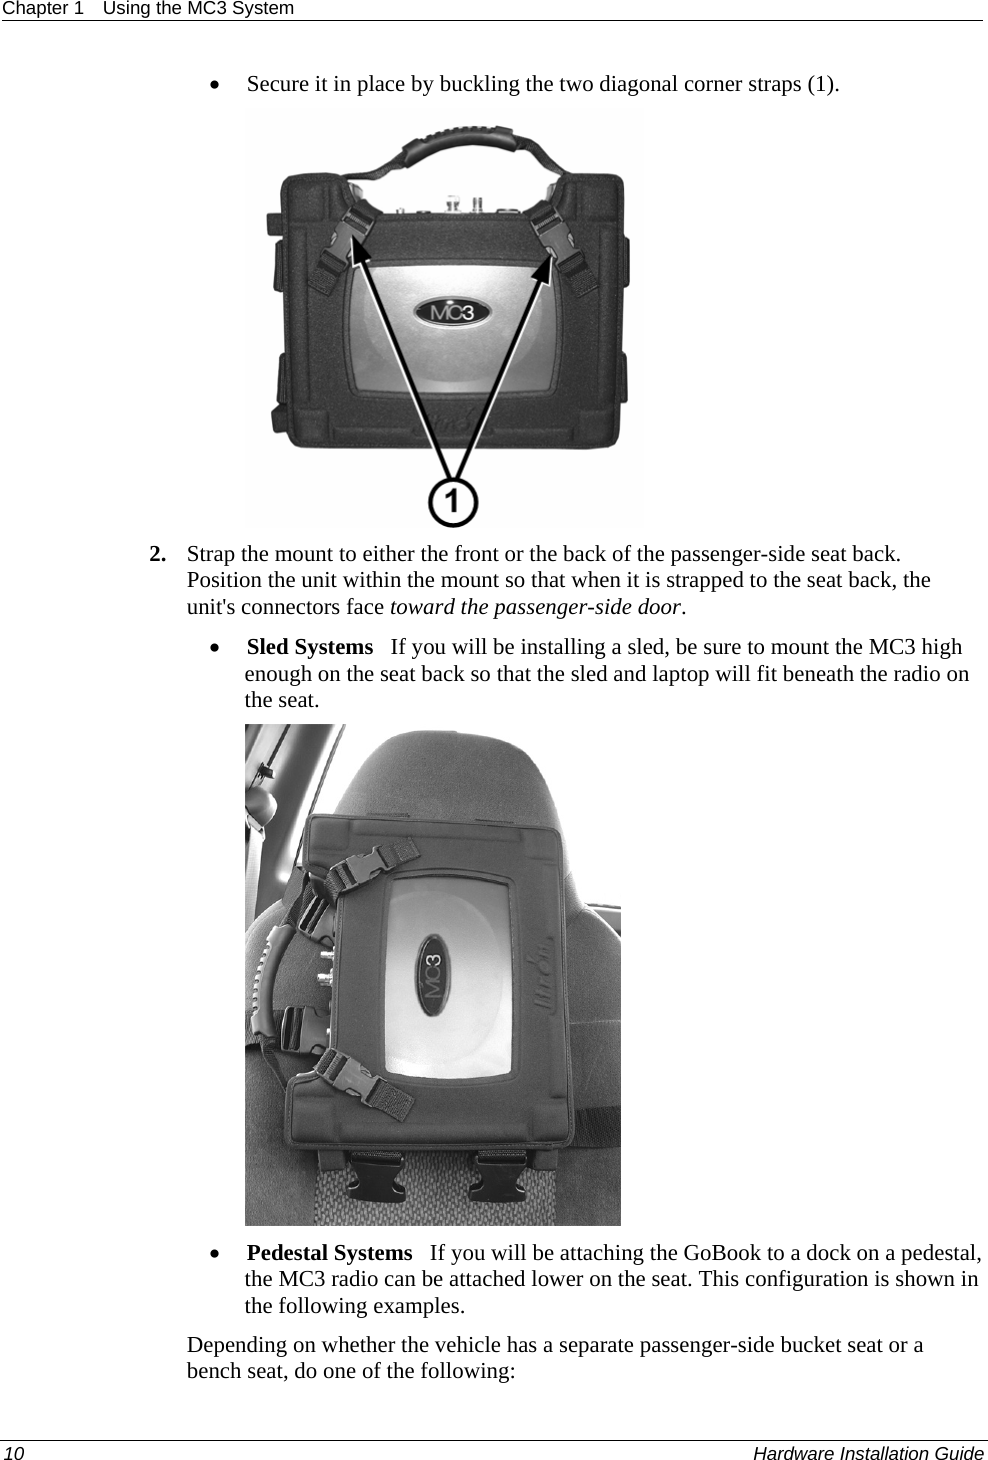 Chapter 1  Using the MC3 System  • Secure it in place by buckling the two diagonal corner straps (1).  2. Strap the mount to either the front or the back of the passenger-side seat back. Position the unit within the mount so that when it is strapped to the seat back, the unit&apos;s connectors face toward the passenger-side door. • Sled Systems   If you will be installing a sled, be sure to mount the MC3 high enough on the seat back so that the sled and laptop will fit beneath the radio on the seat.   • Pedestal Systems   If you will be attaching the GoBook to a dock on a pedestal, the MC3 radio can be attached lower on the seat. This configuration is shown in the following examples.  Depending on whether the vehicle has a separate passenger-side bucket seat or a bench seat, do one of the following: 10    Hardware Installation Guide  